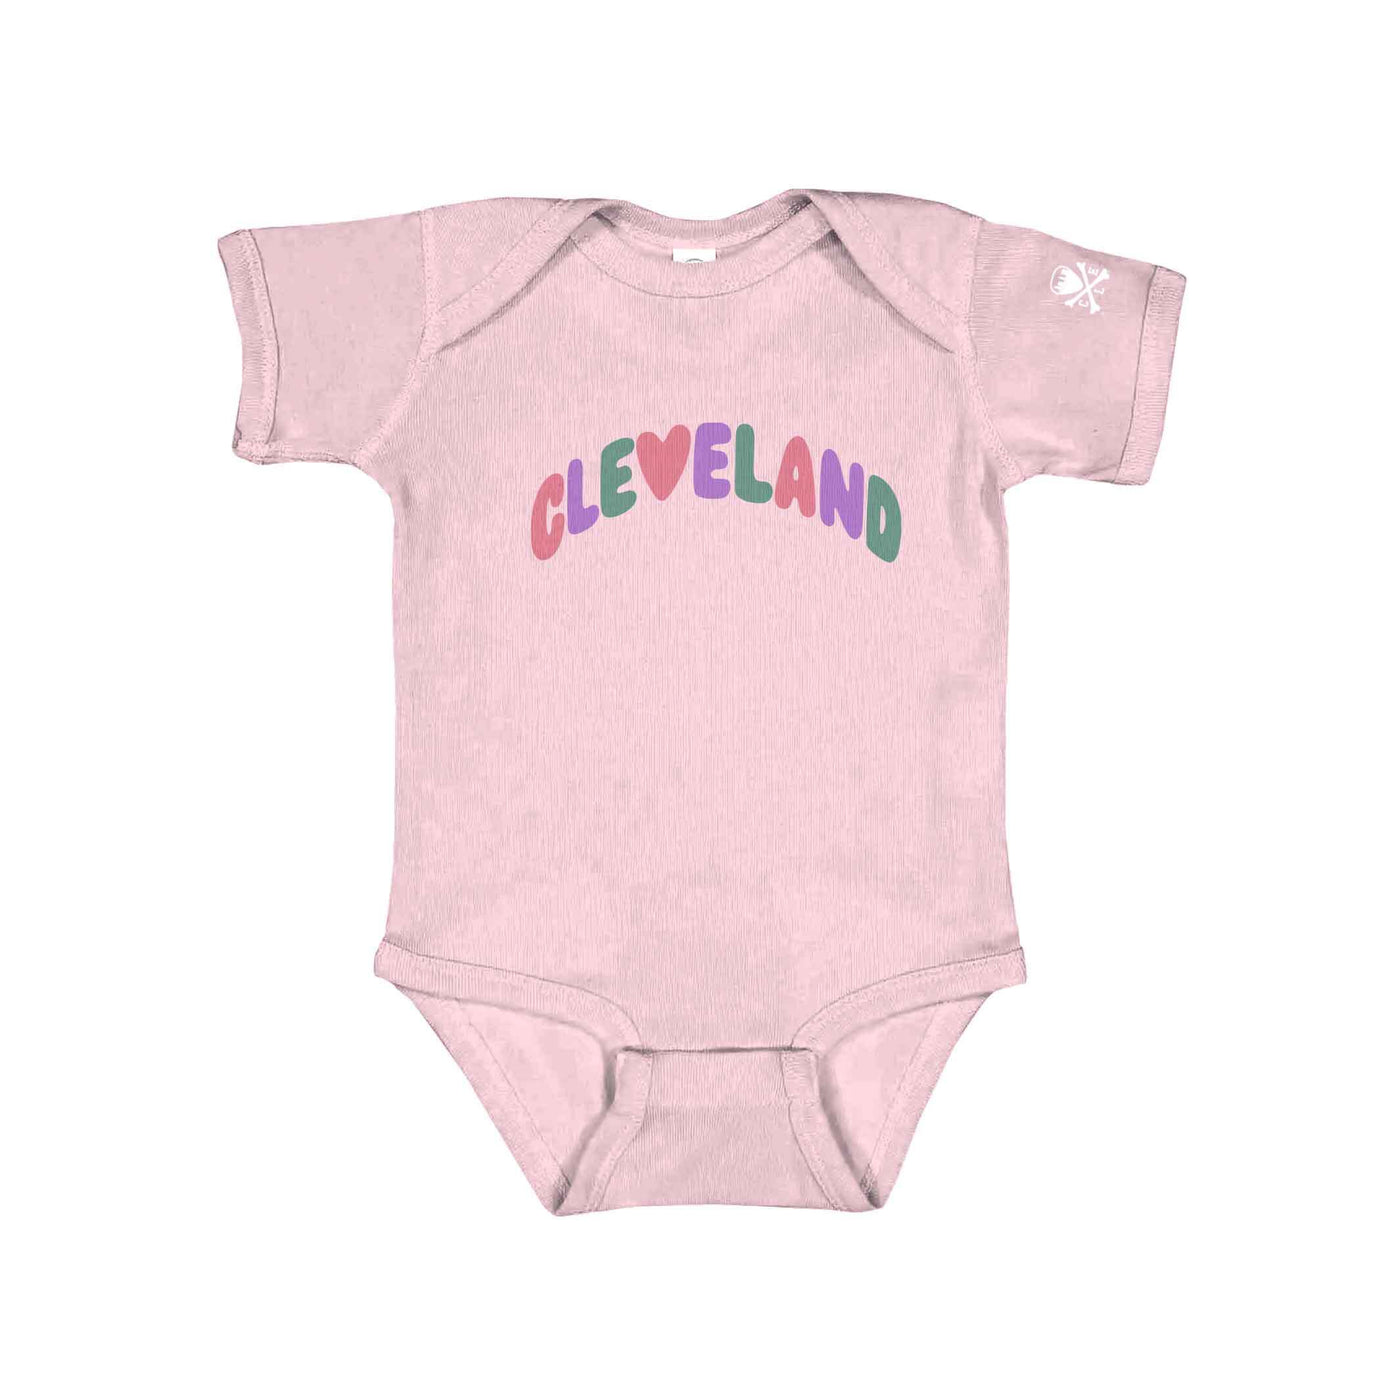 Cleveland Heart Arch - Newborn and Infant Bodysuit